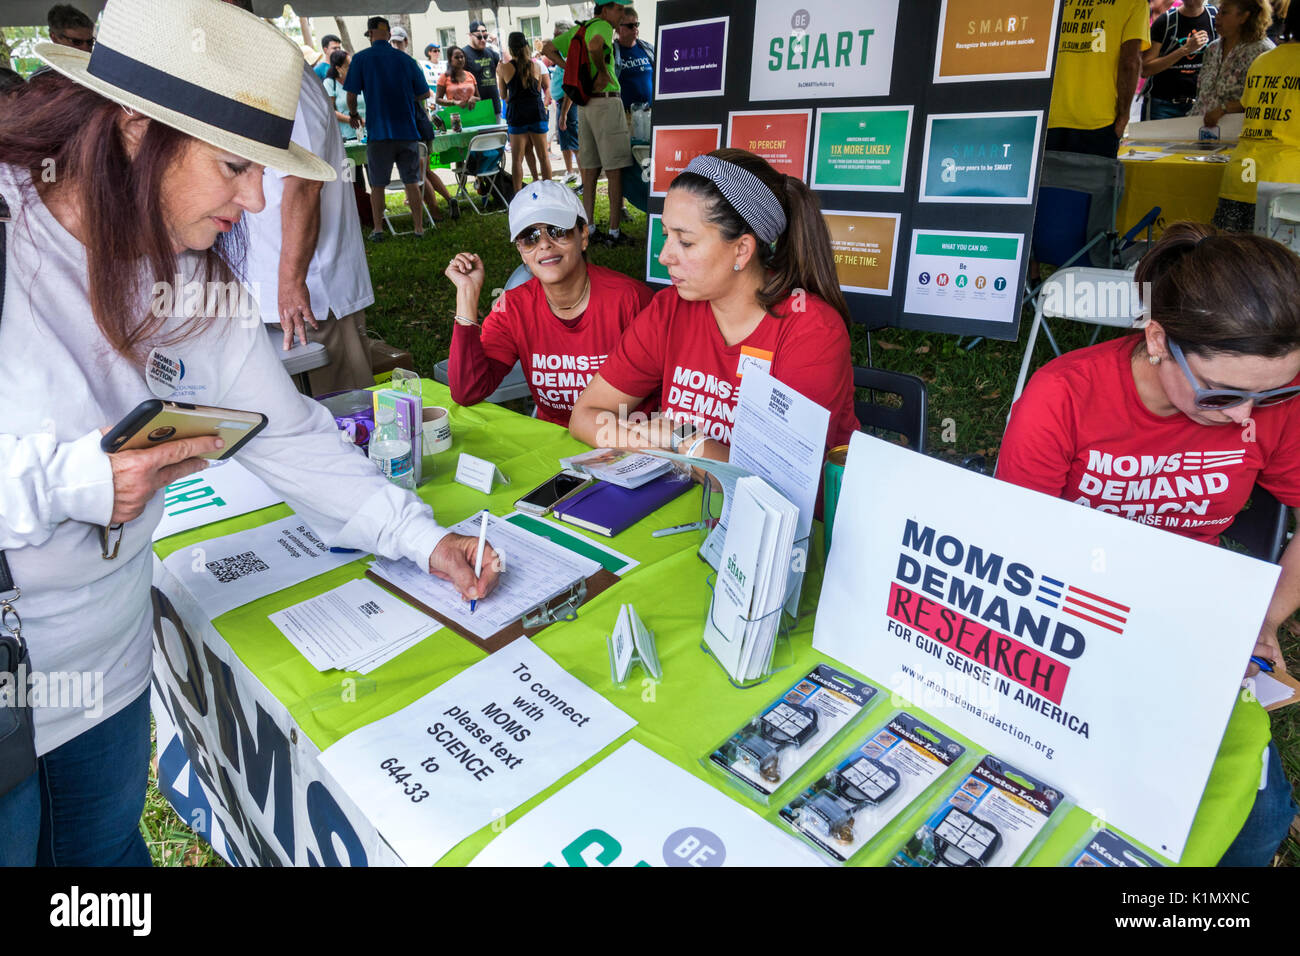 Miami Florida,Downtown,Government Center,March for Science,protest,rally,science expo,booth,stall,Moms Demand Research,FL170430170 Stock Photo